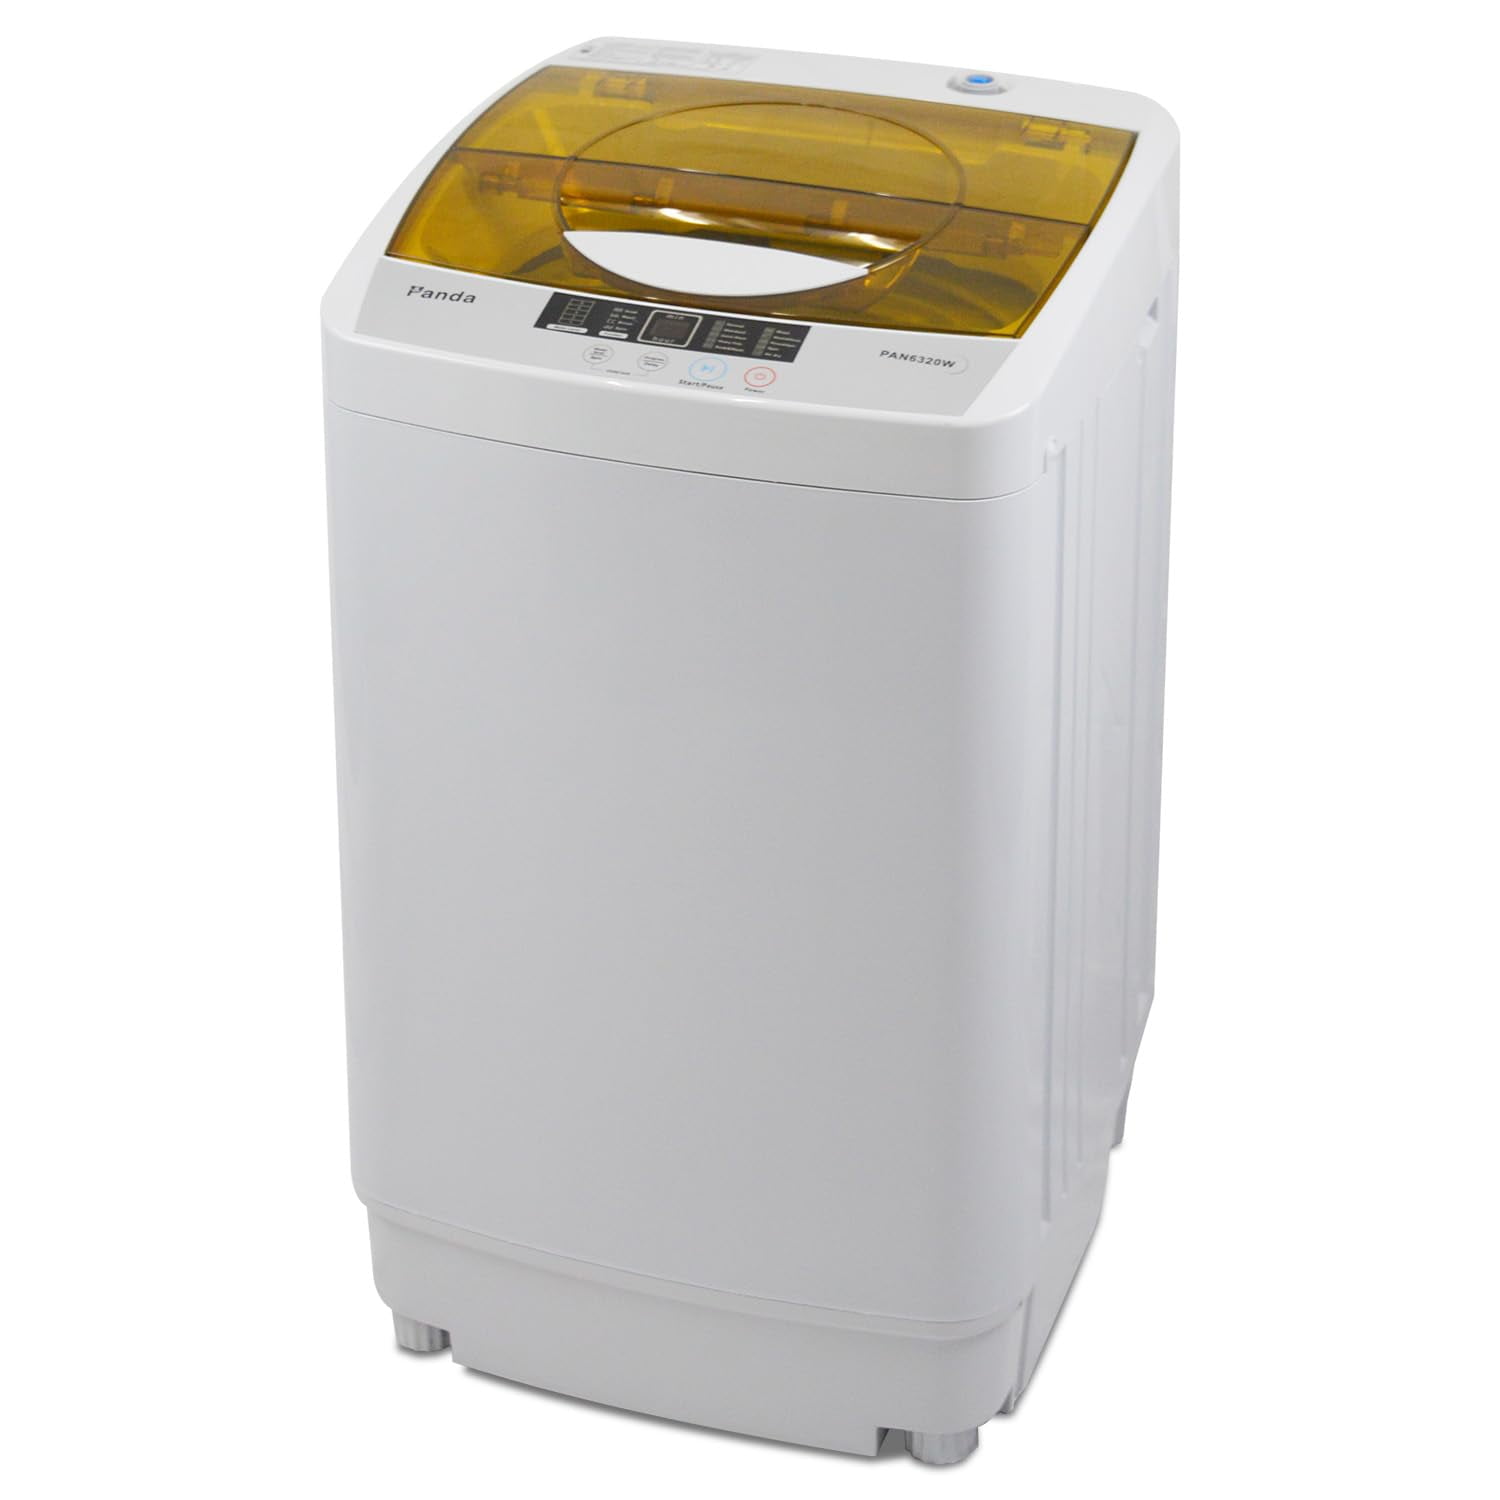 Qhomic Washing Machine, 17.8 lb. Capacity Fully Automatic Washer and Dryer Combo, Energy Efficient Portable Washing Machine with Clear Lid/LED Display